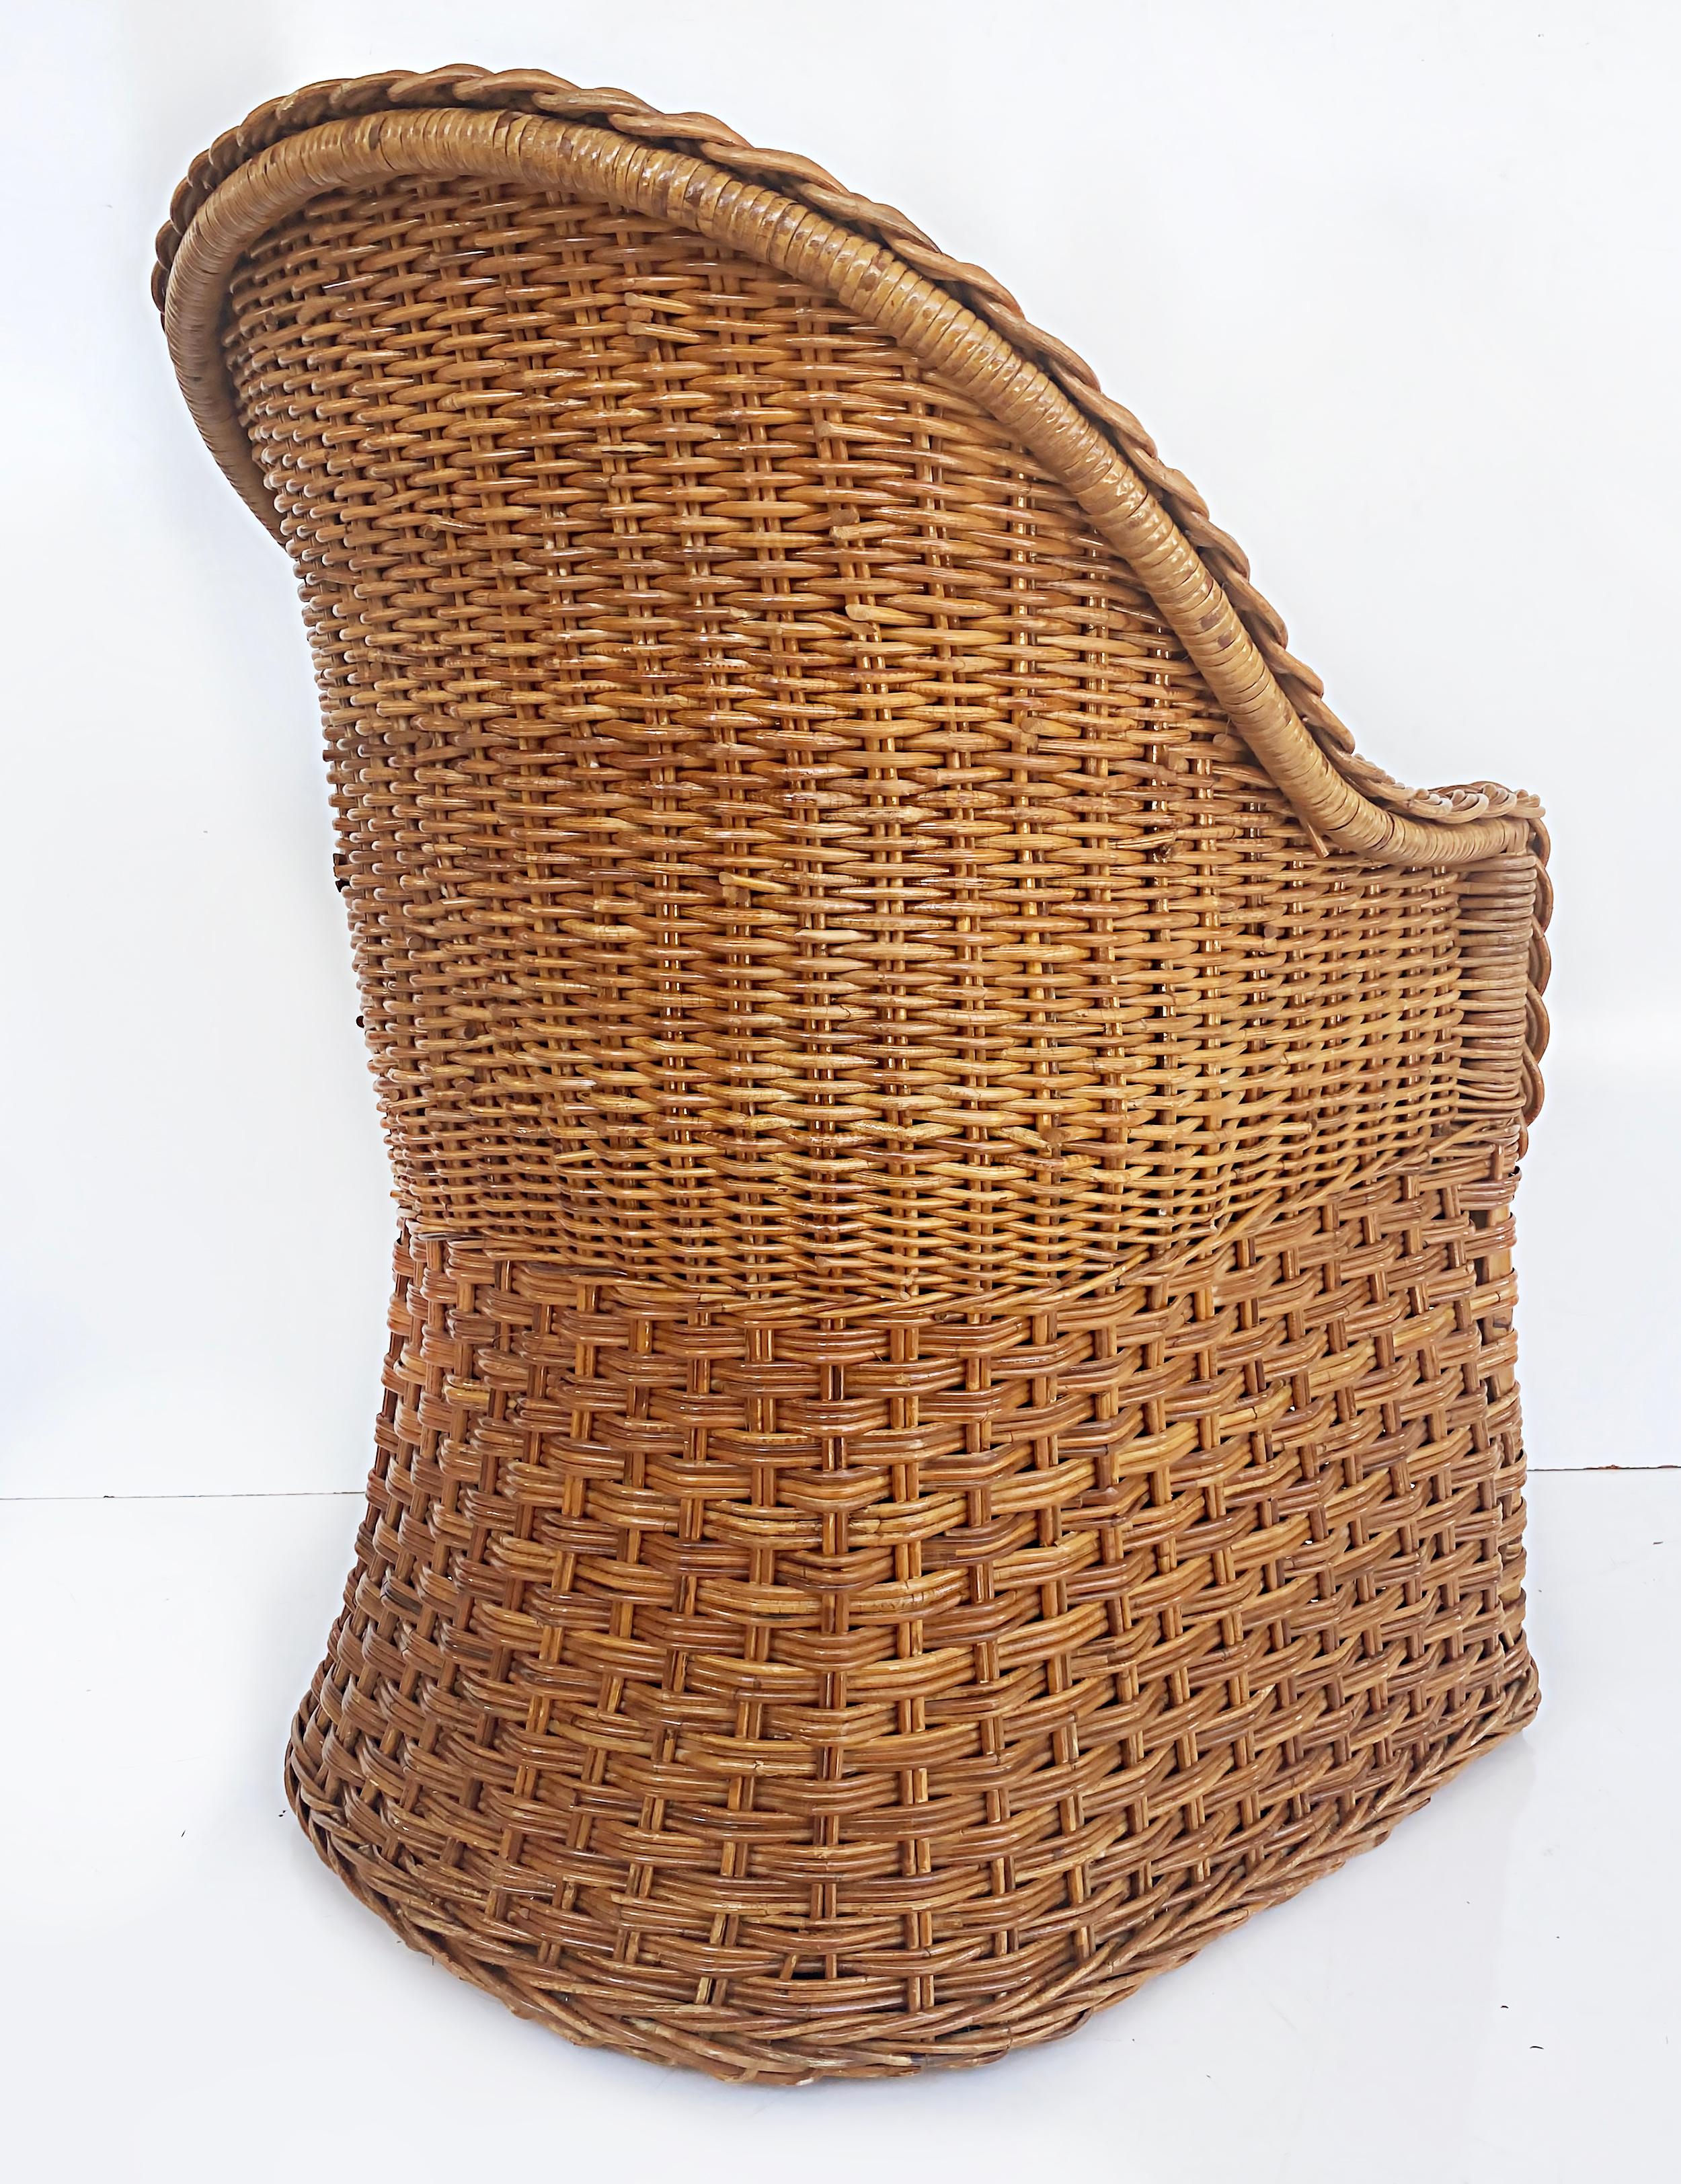 Wicker Works Braided Rattan Club Chairs, New Upholstery, 1 Pair Available For Sale 3